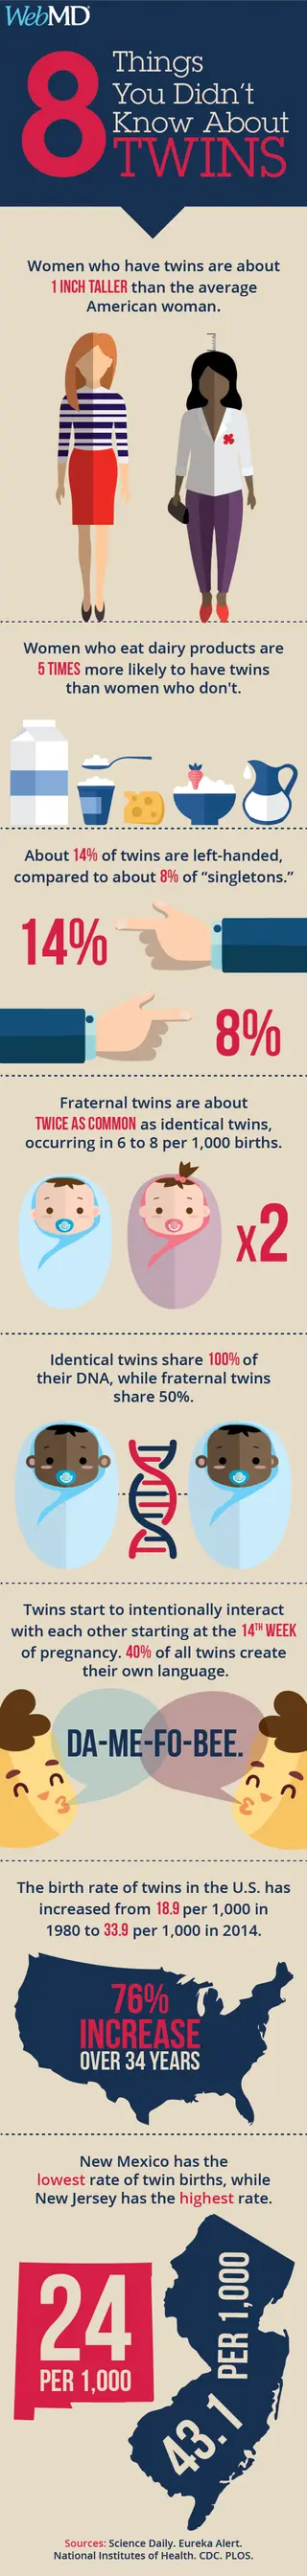 facts about twins